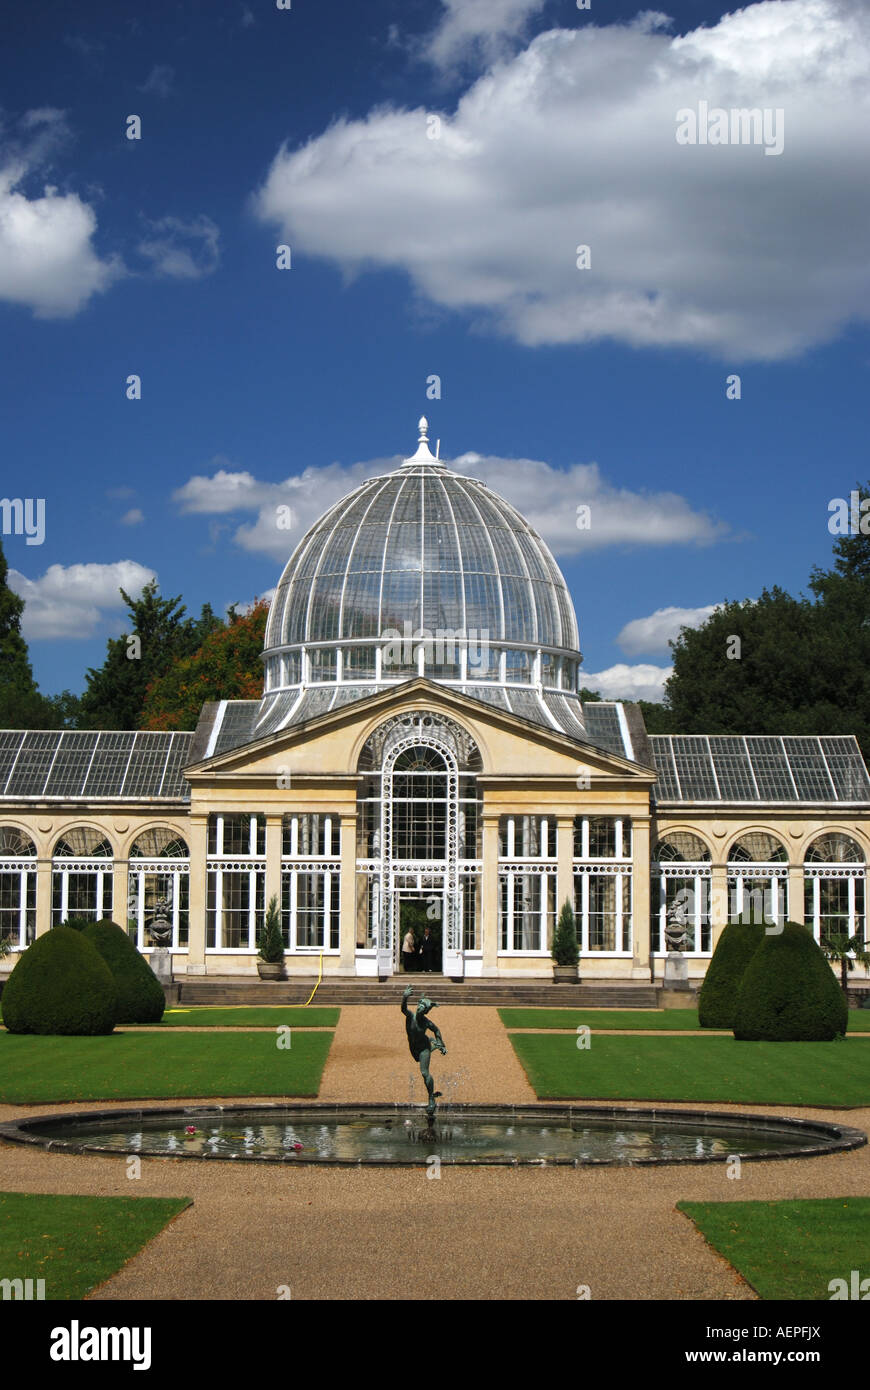 The Great Conservatory and Gardens, Syon House, Brentford, London Borough of Hounslow, Greater London, England, Regno Unito Foto Stock